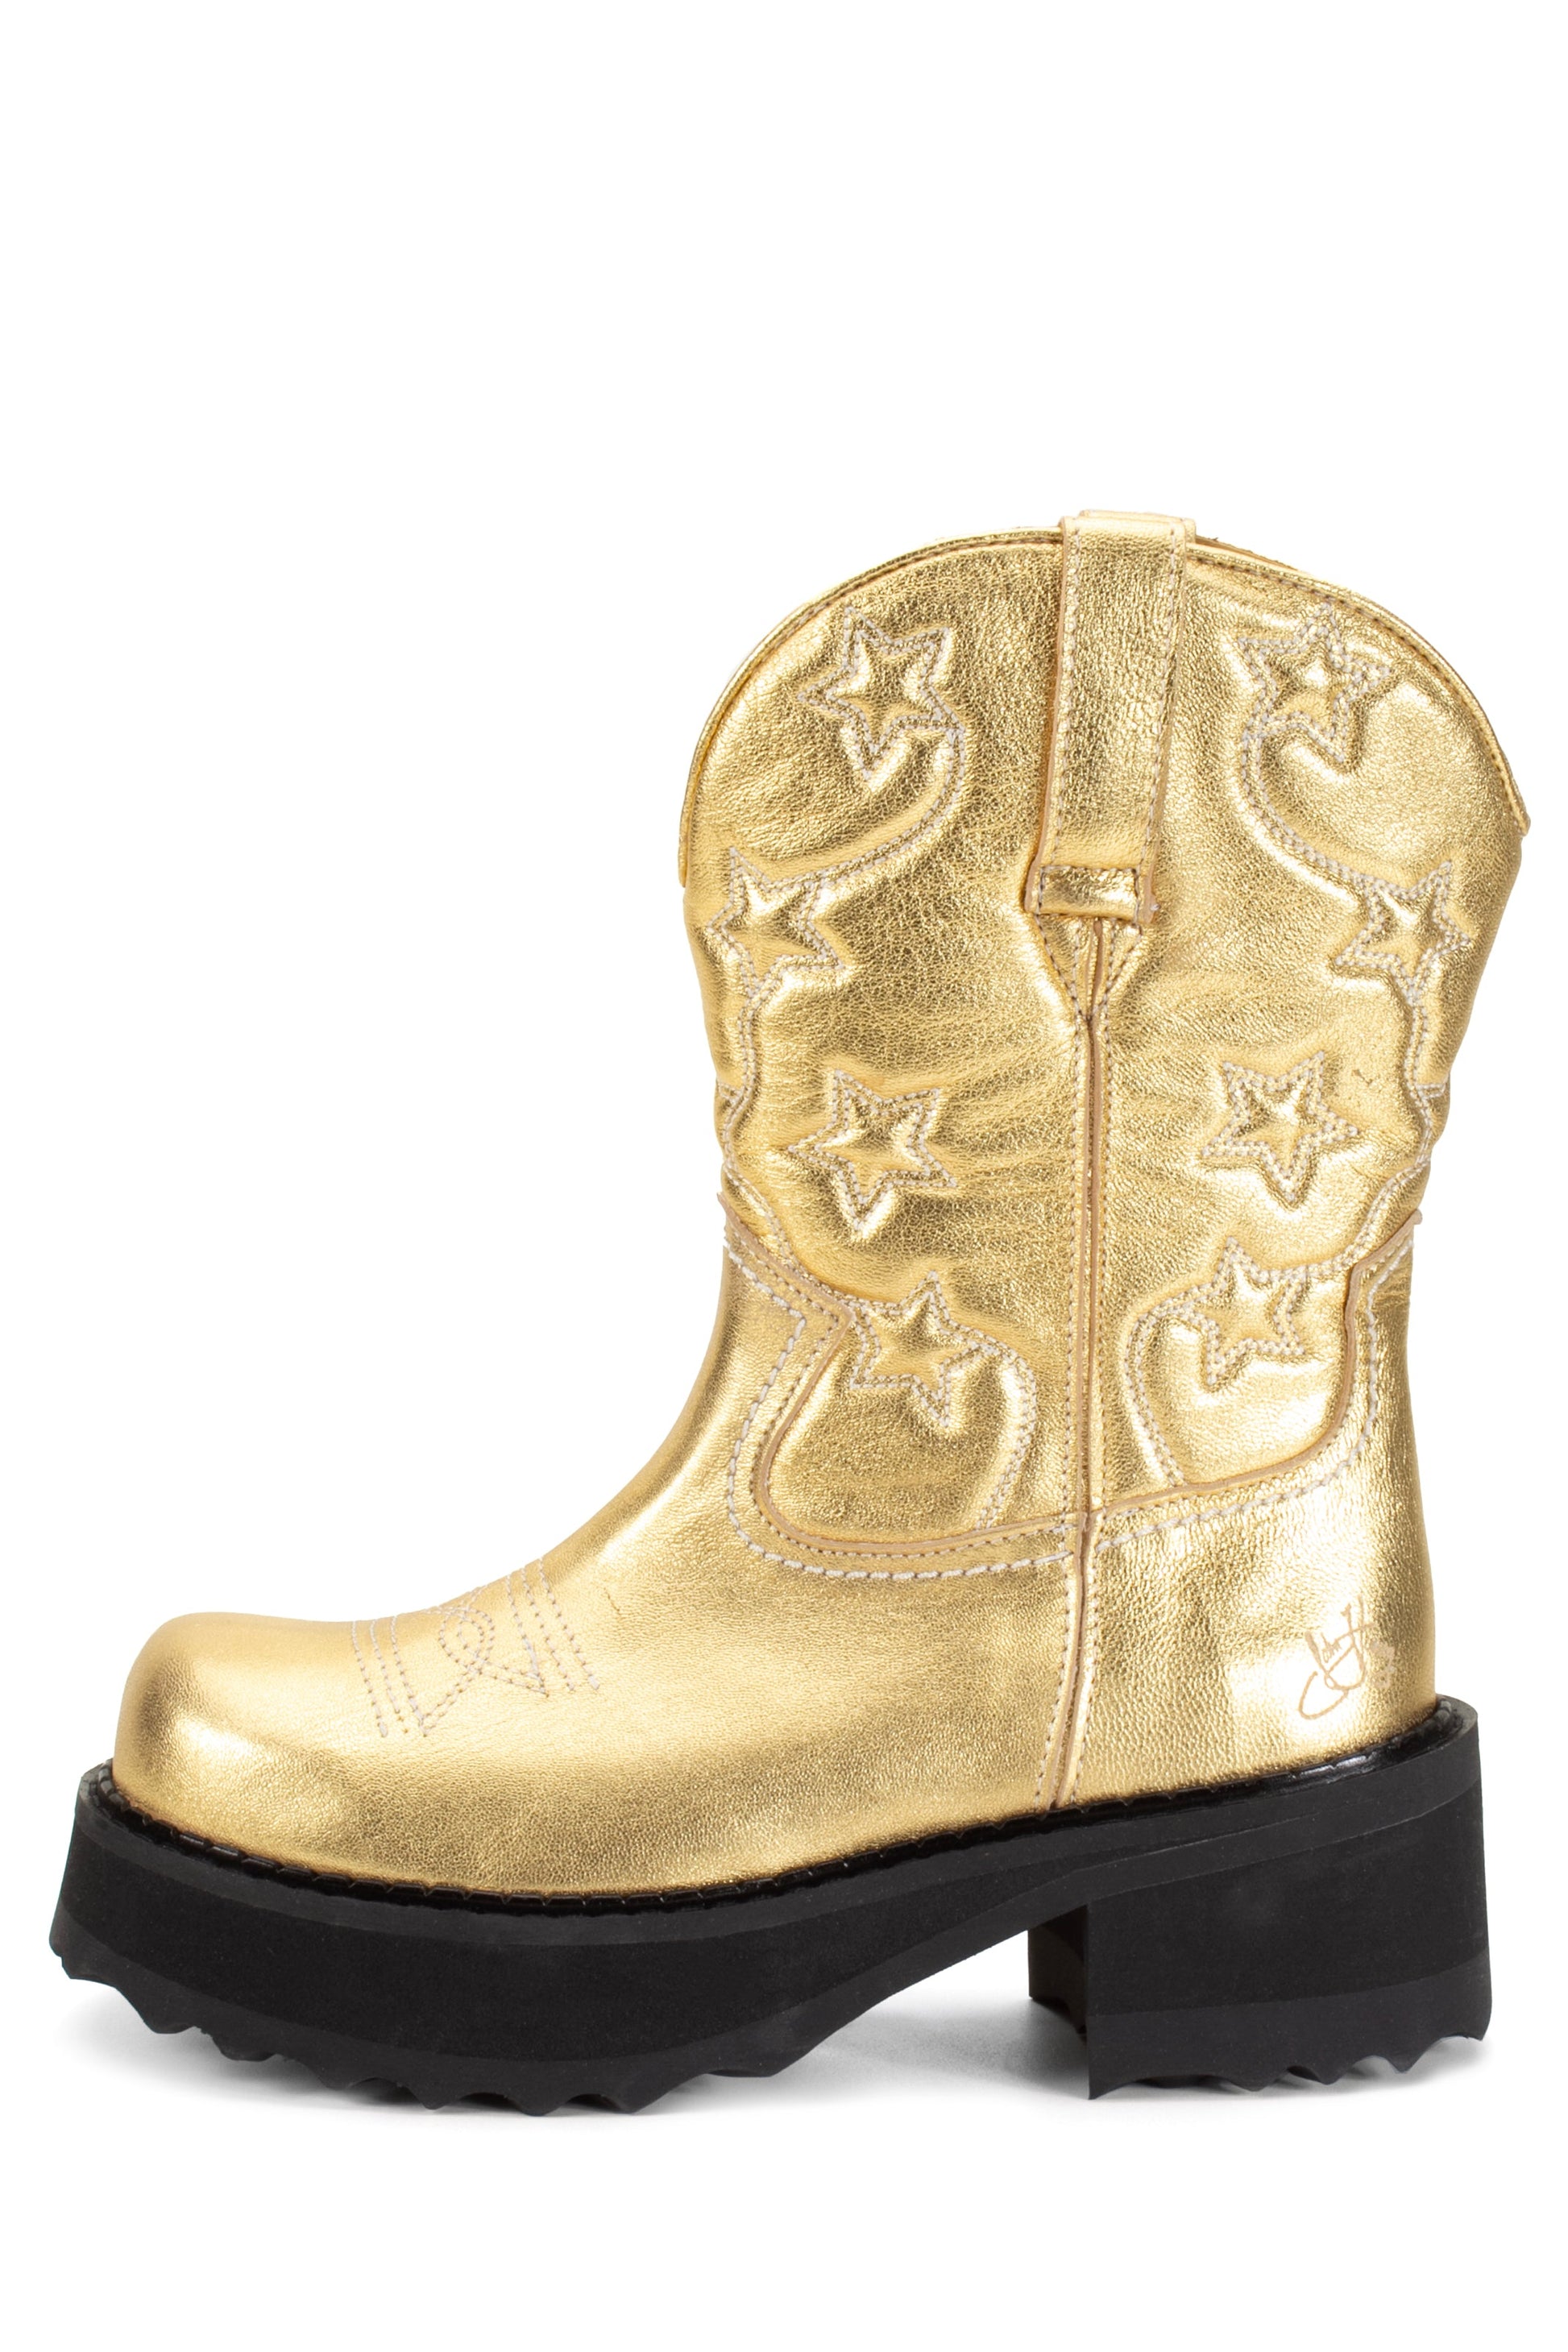 Mid-size boots with 2 handles to make them easy to wear, engraved lone-stars front and back